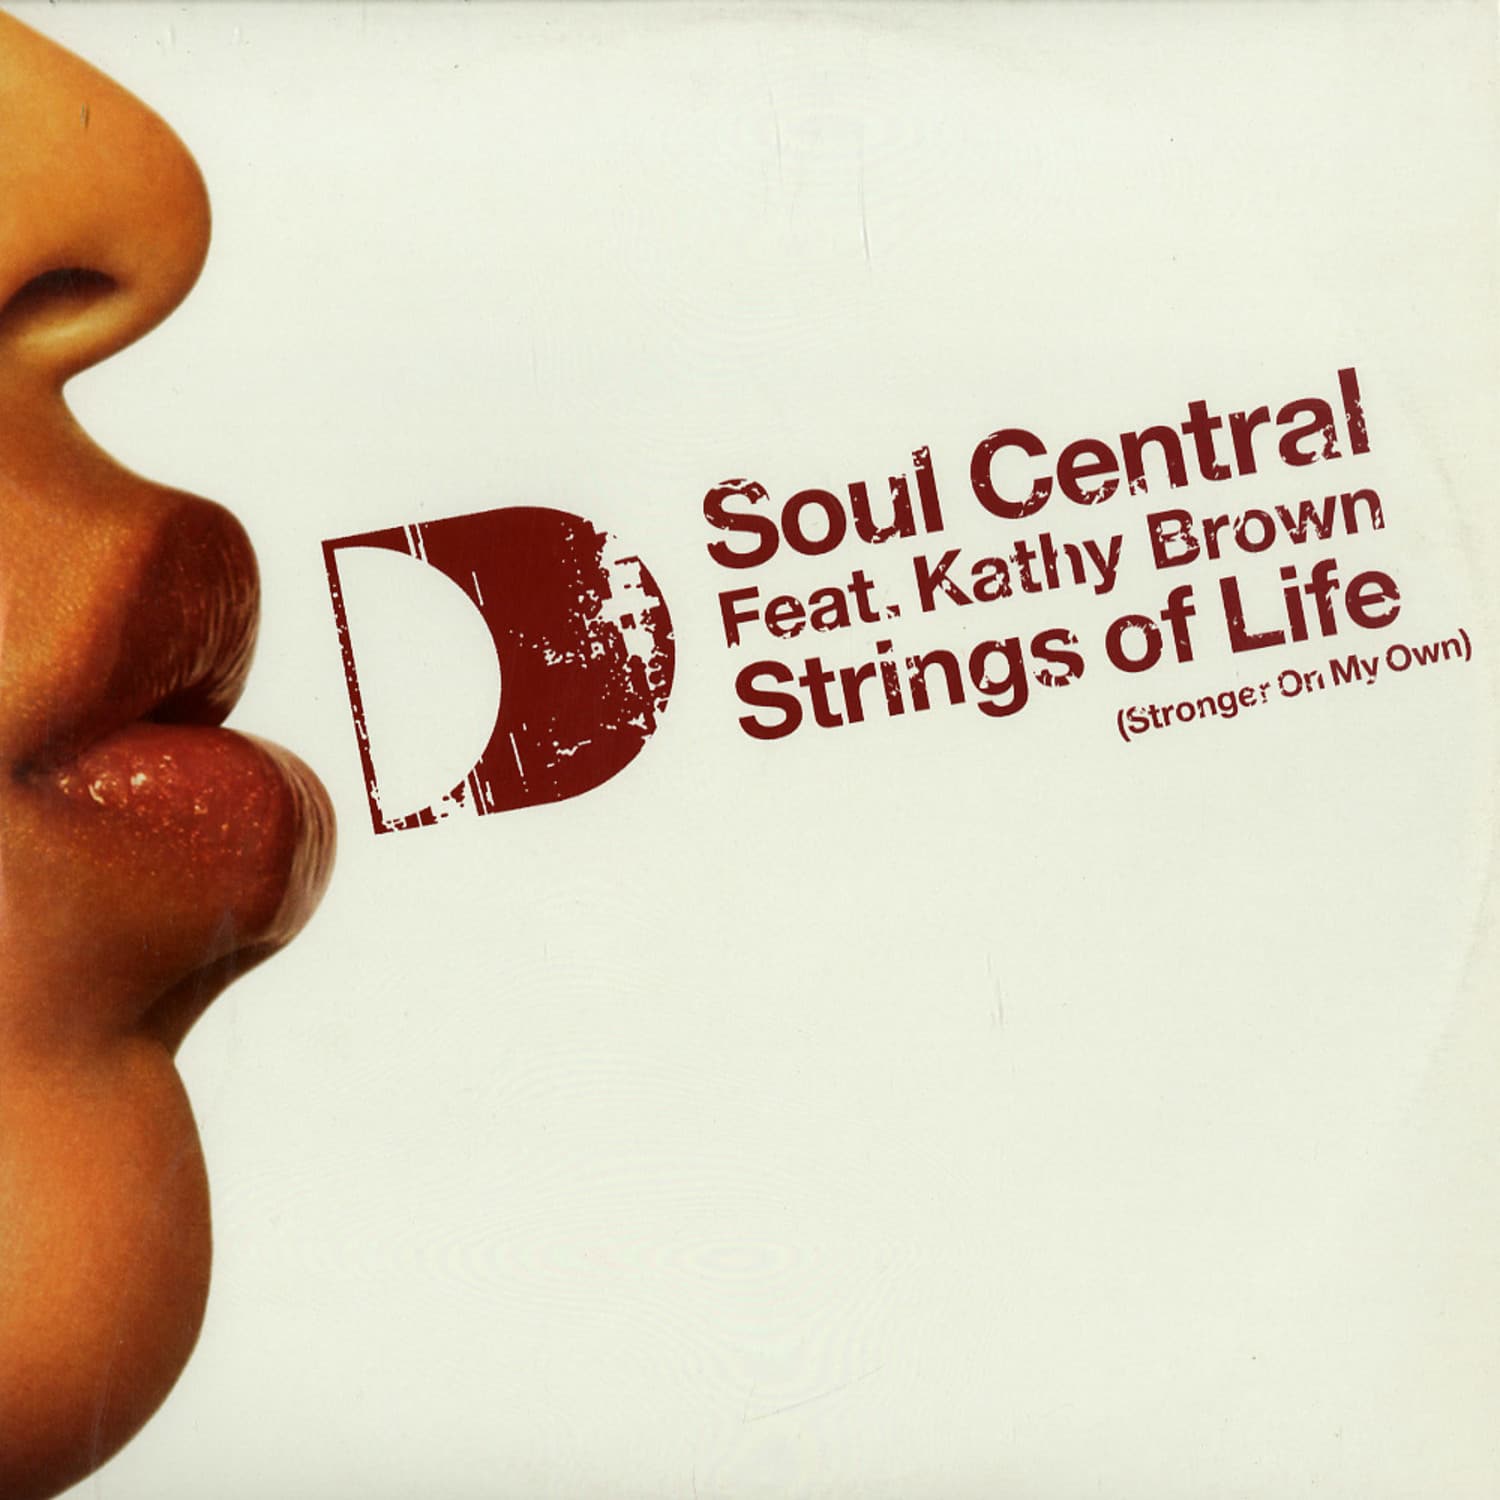 Soul Central feat. Kathy Brown - STRINGS OF LIFE